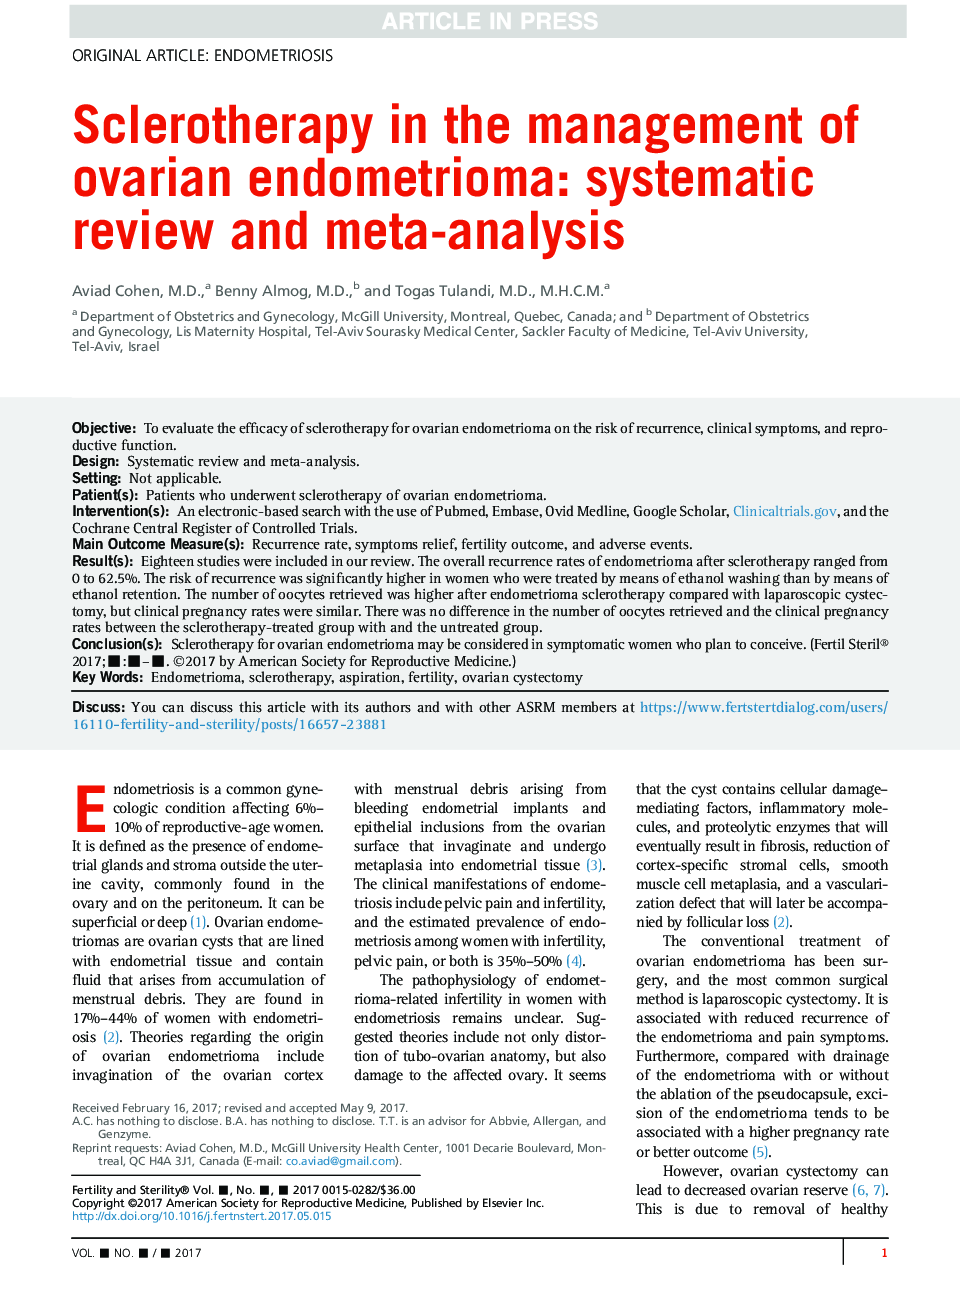 Sclerotherapy in the management of ovarian endometrioma: systematic review and meta-analysis